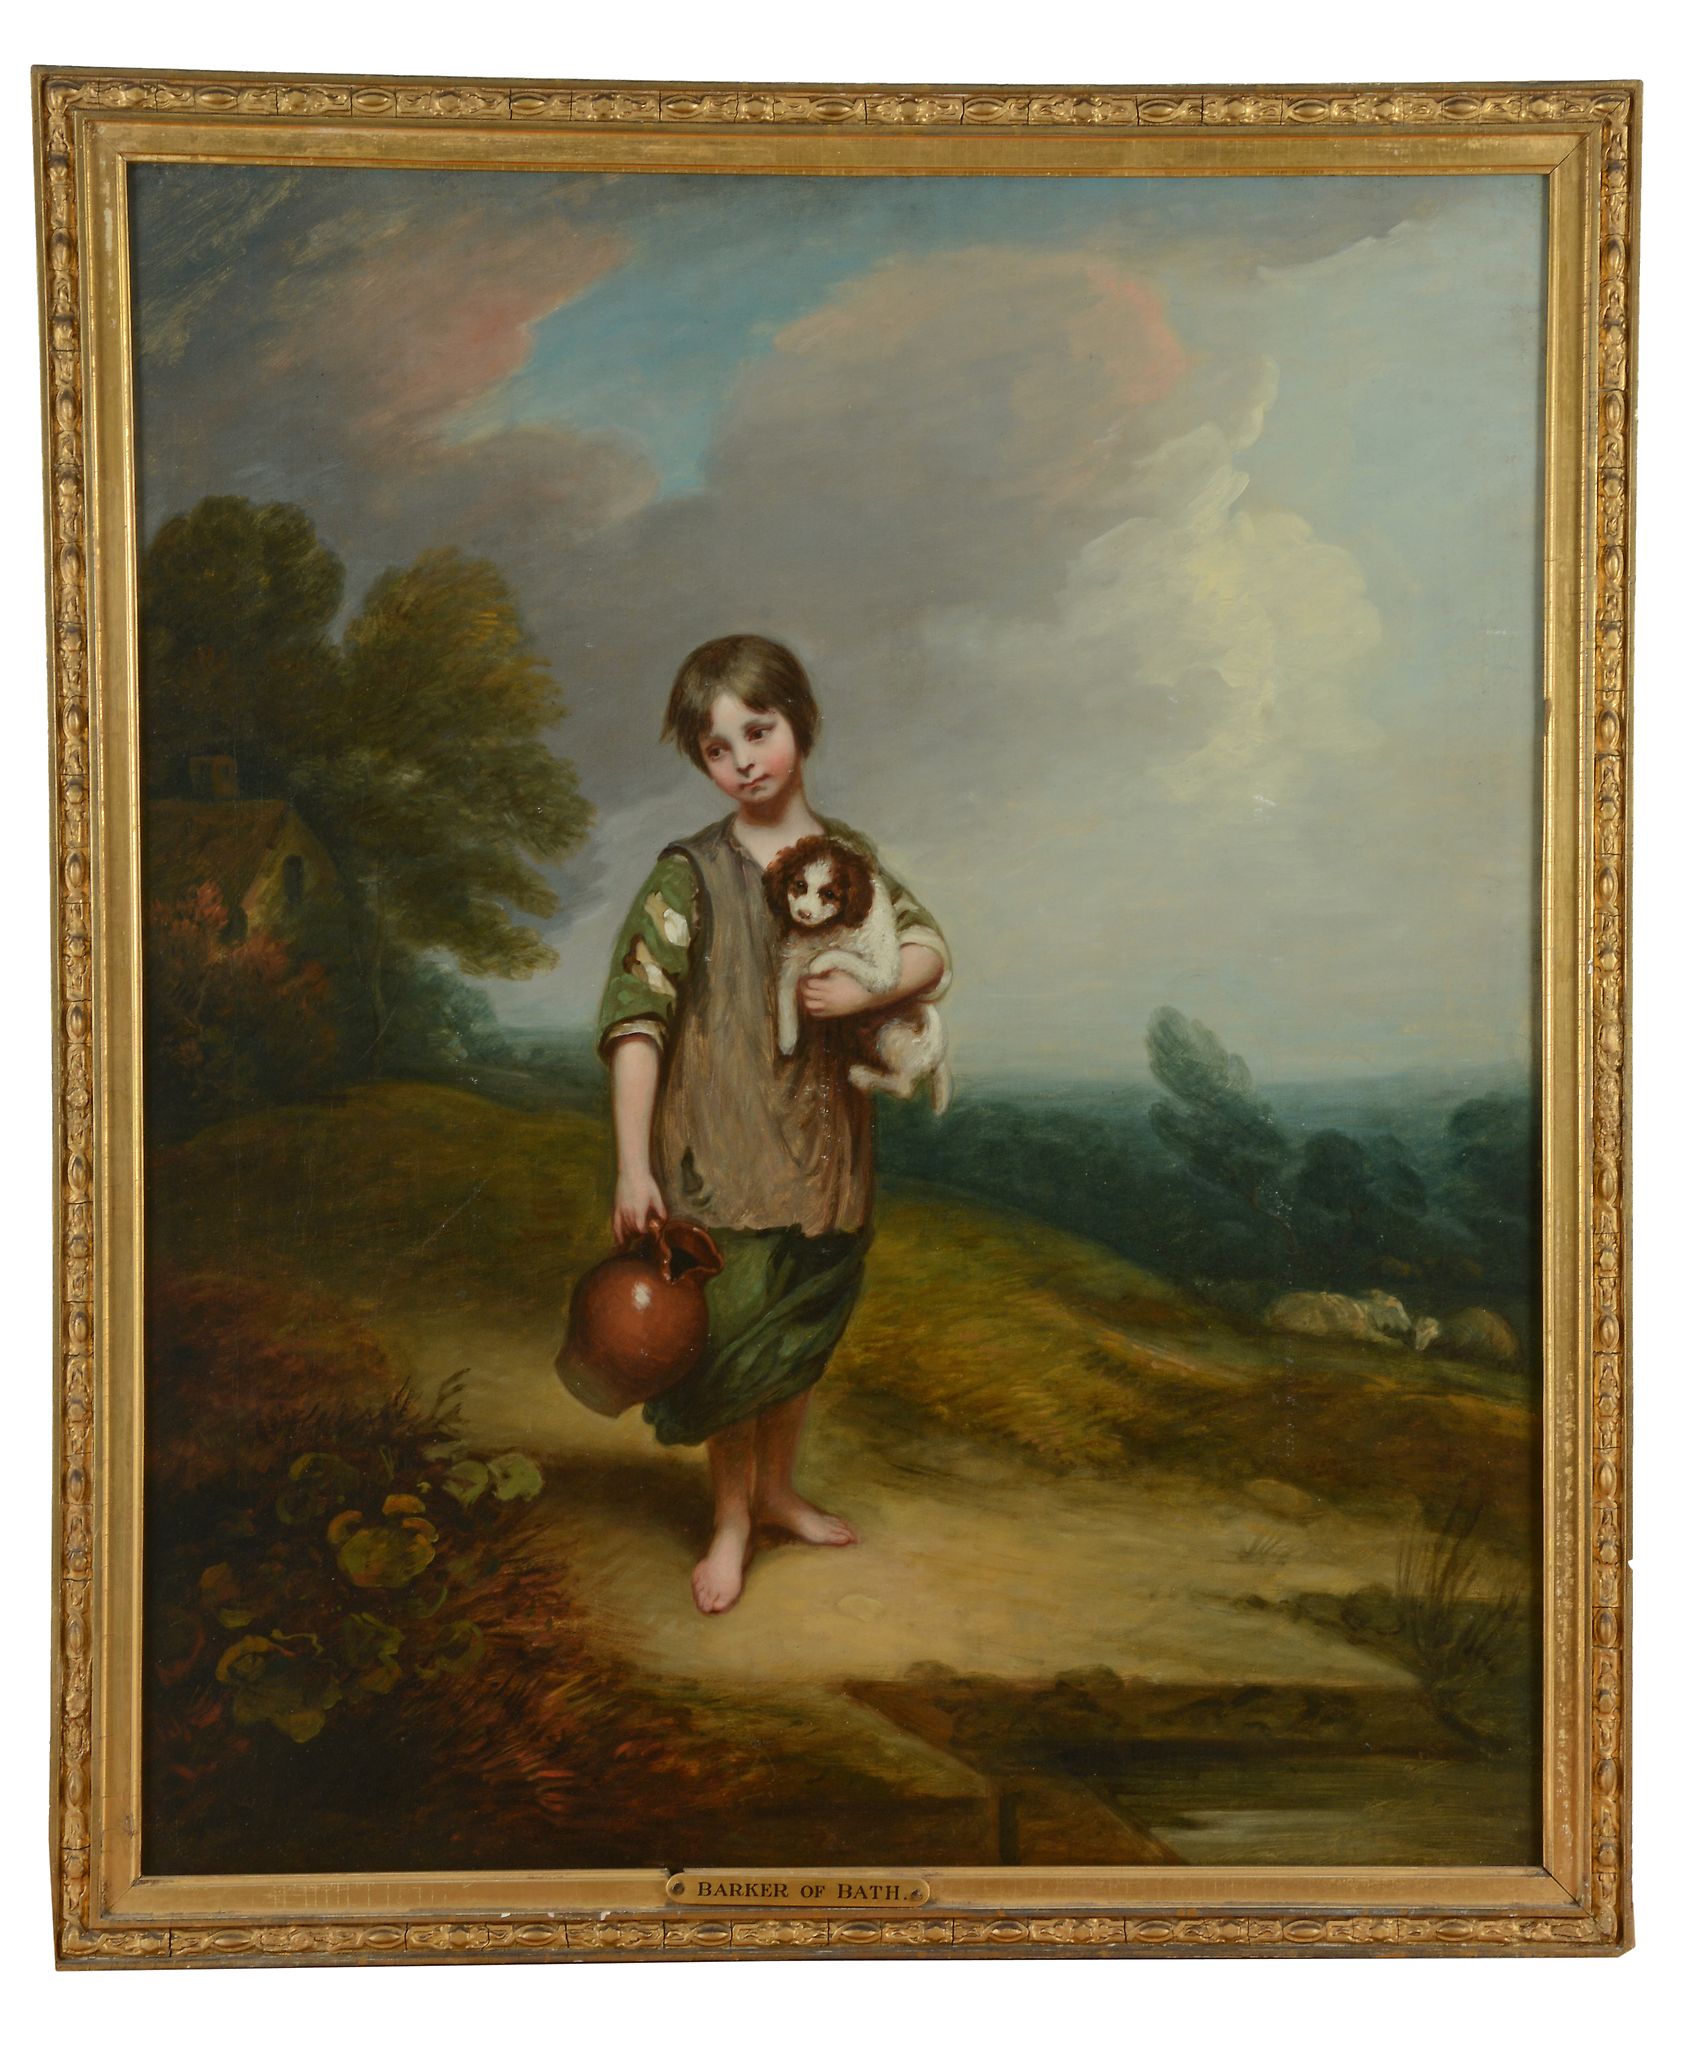 Circle of Thomas Barker, 'Barker of Bath' - The Cottage Girl After Thomas Gainsborough Oil on canvas - Image 3 of 3